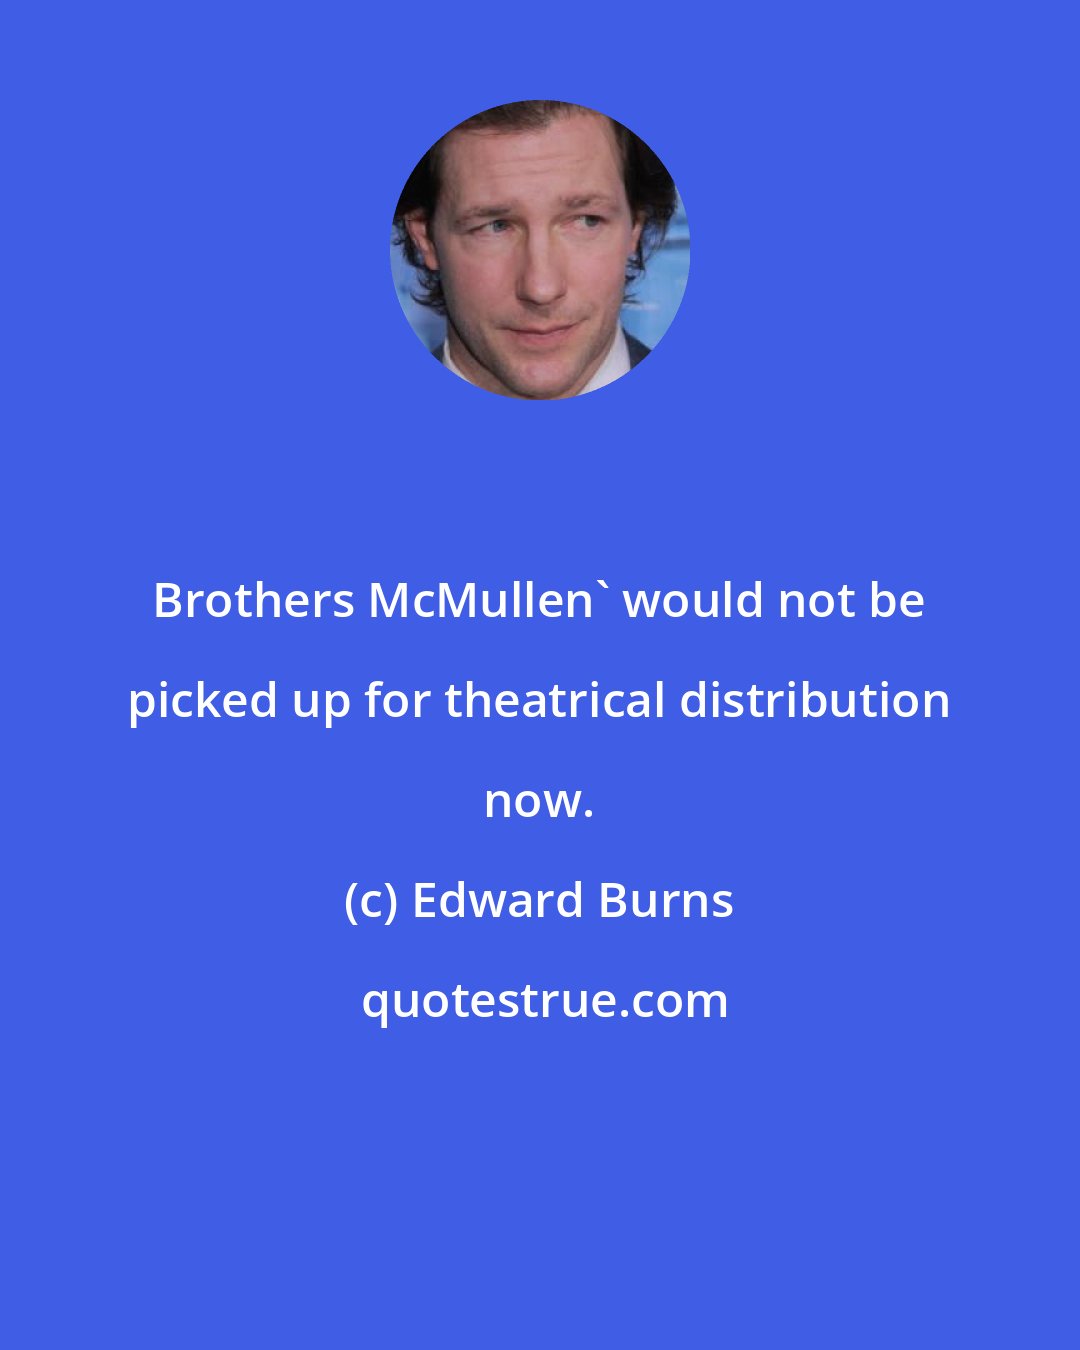 Edward Burns: Brothers McMullen' would not be picked up for theatrical distribution now.